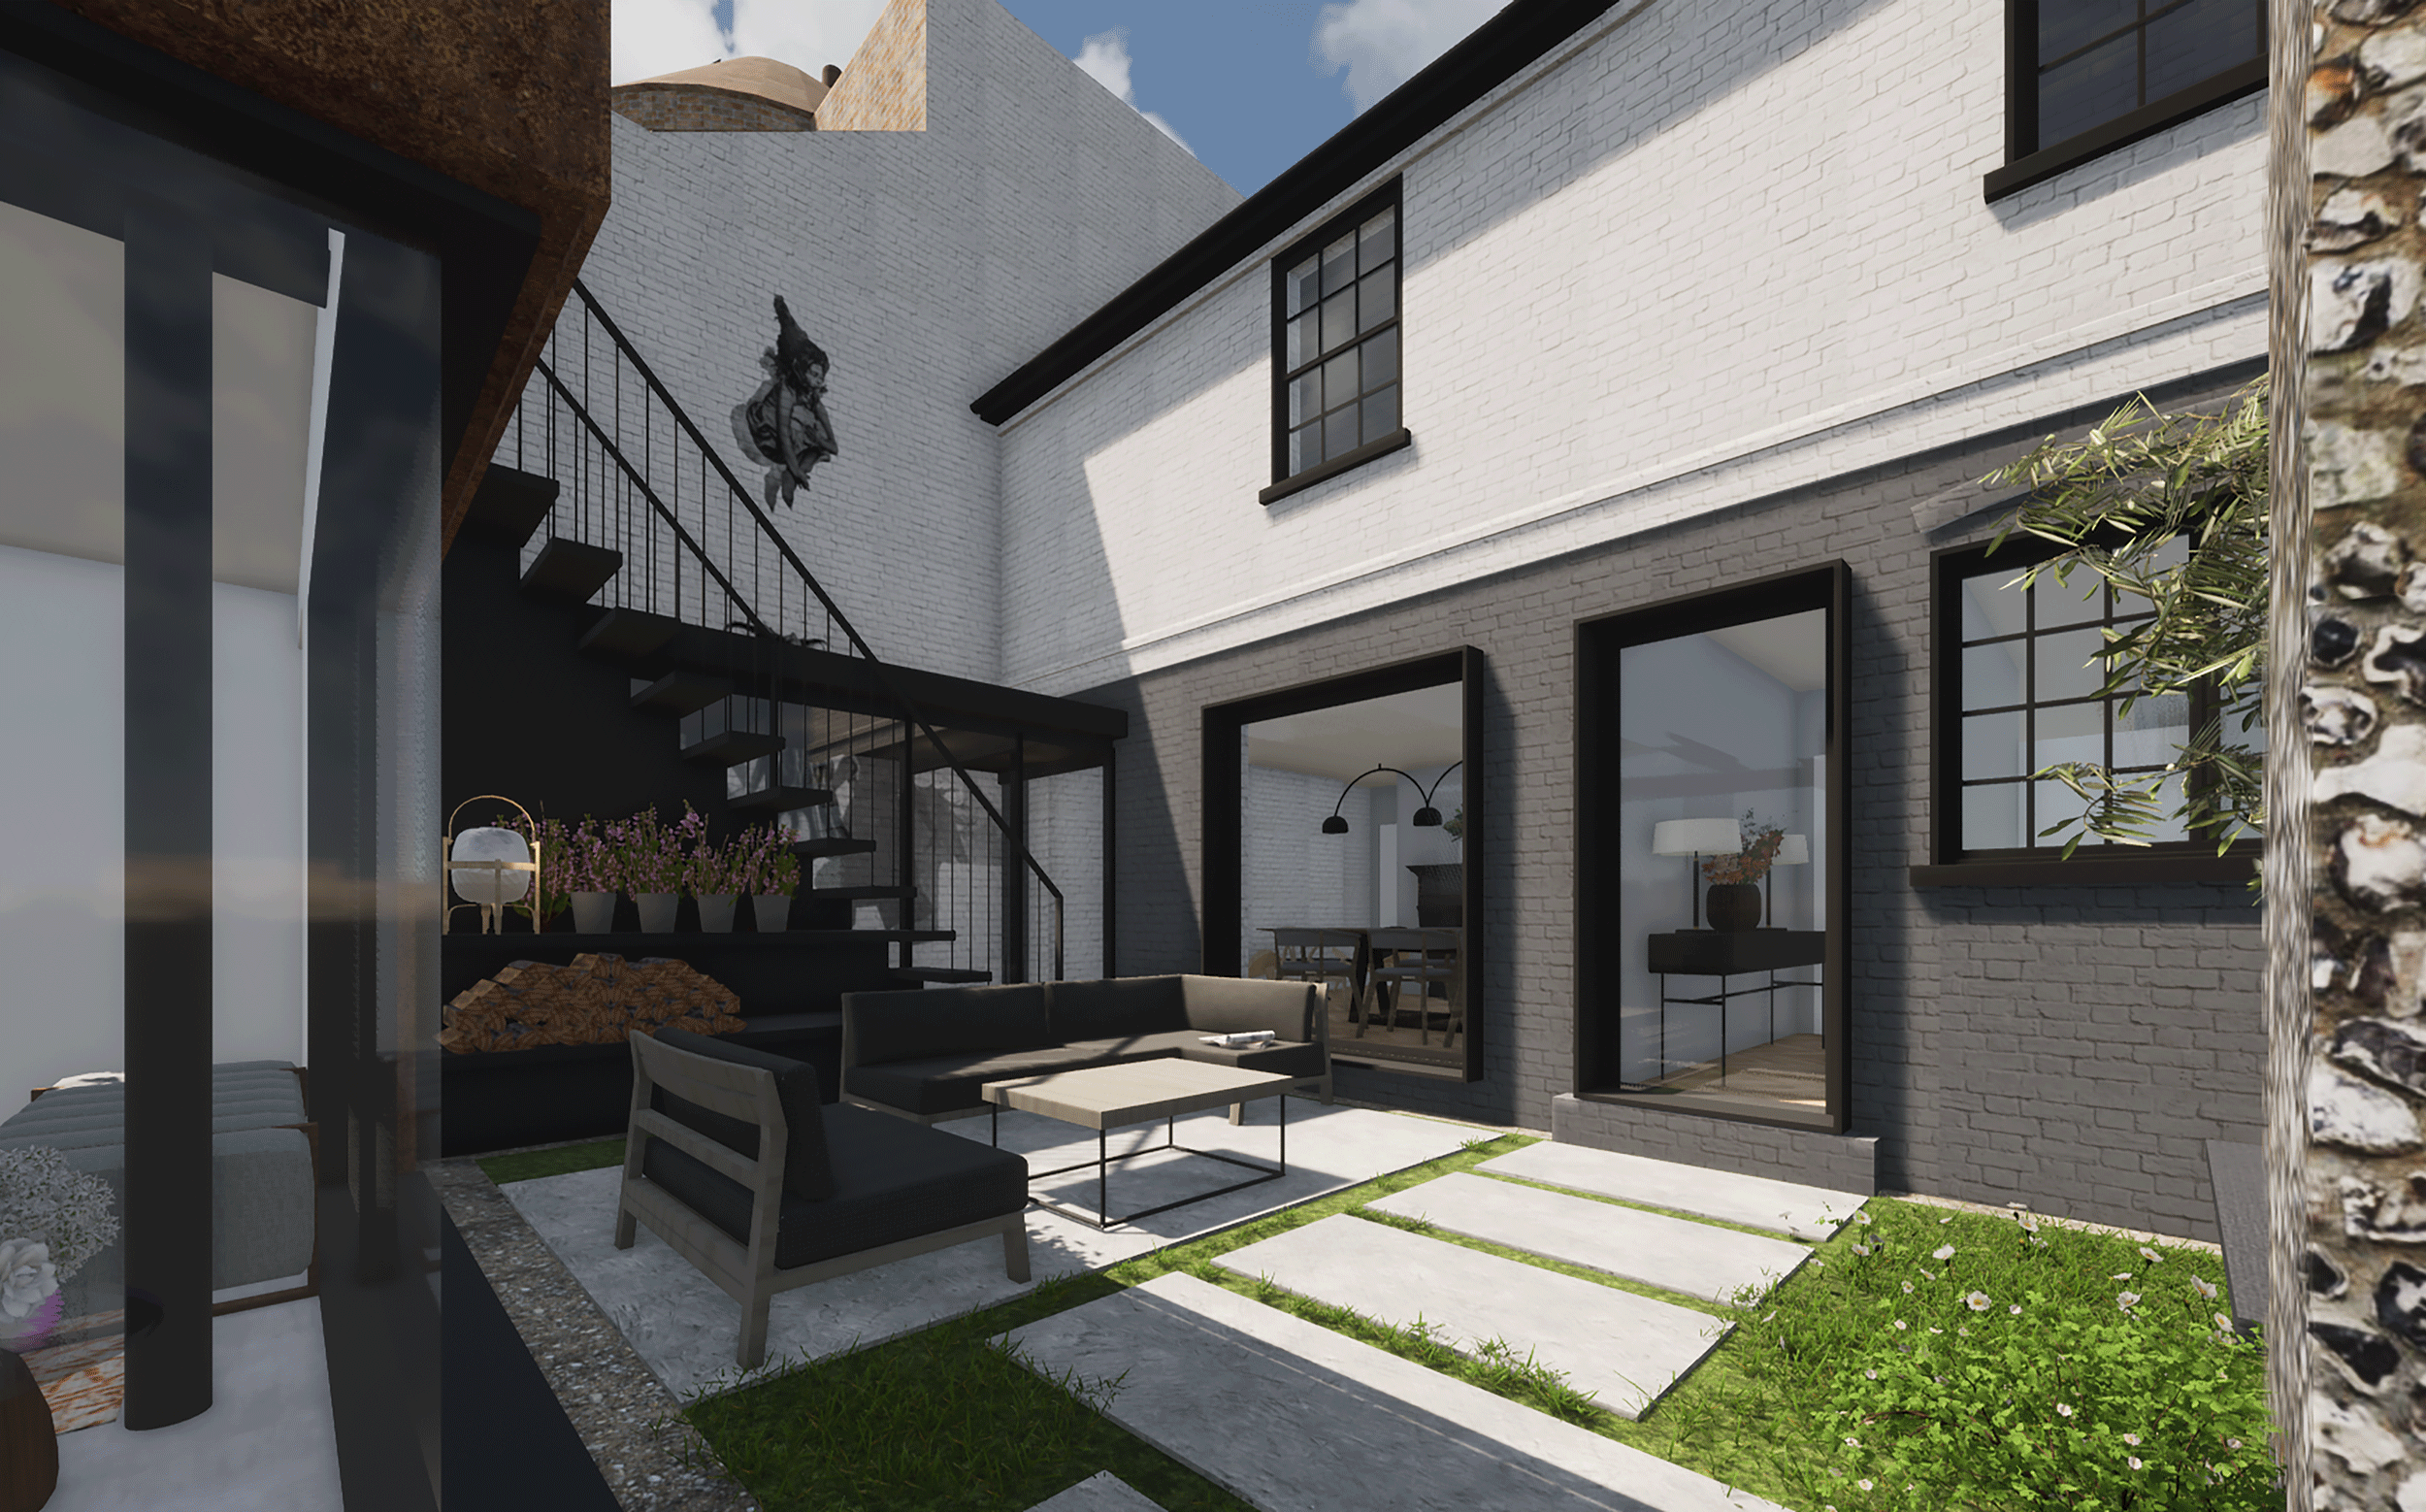 NEW COURTYARD TO GRADE II LISTED DWELLING